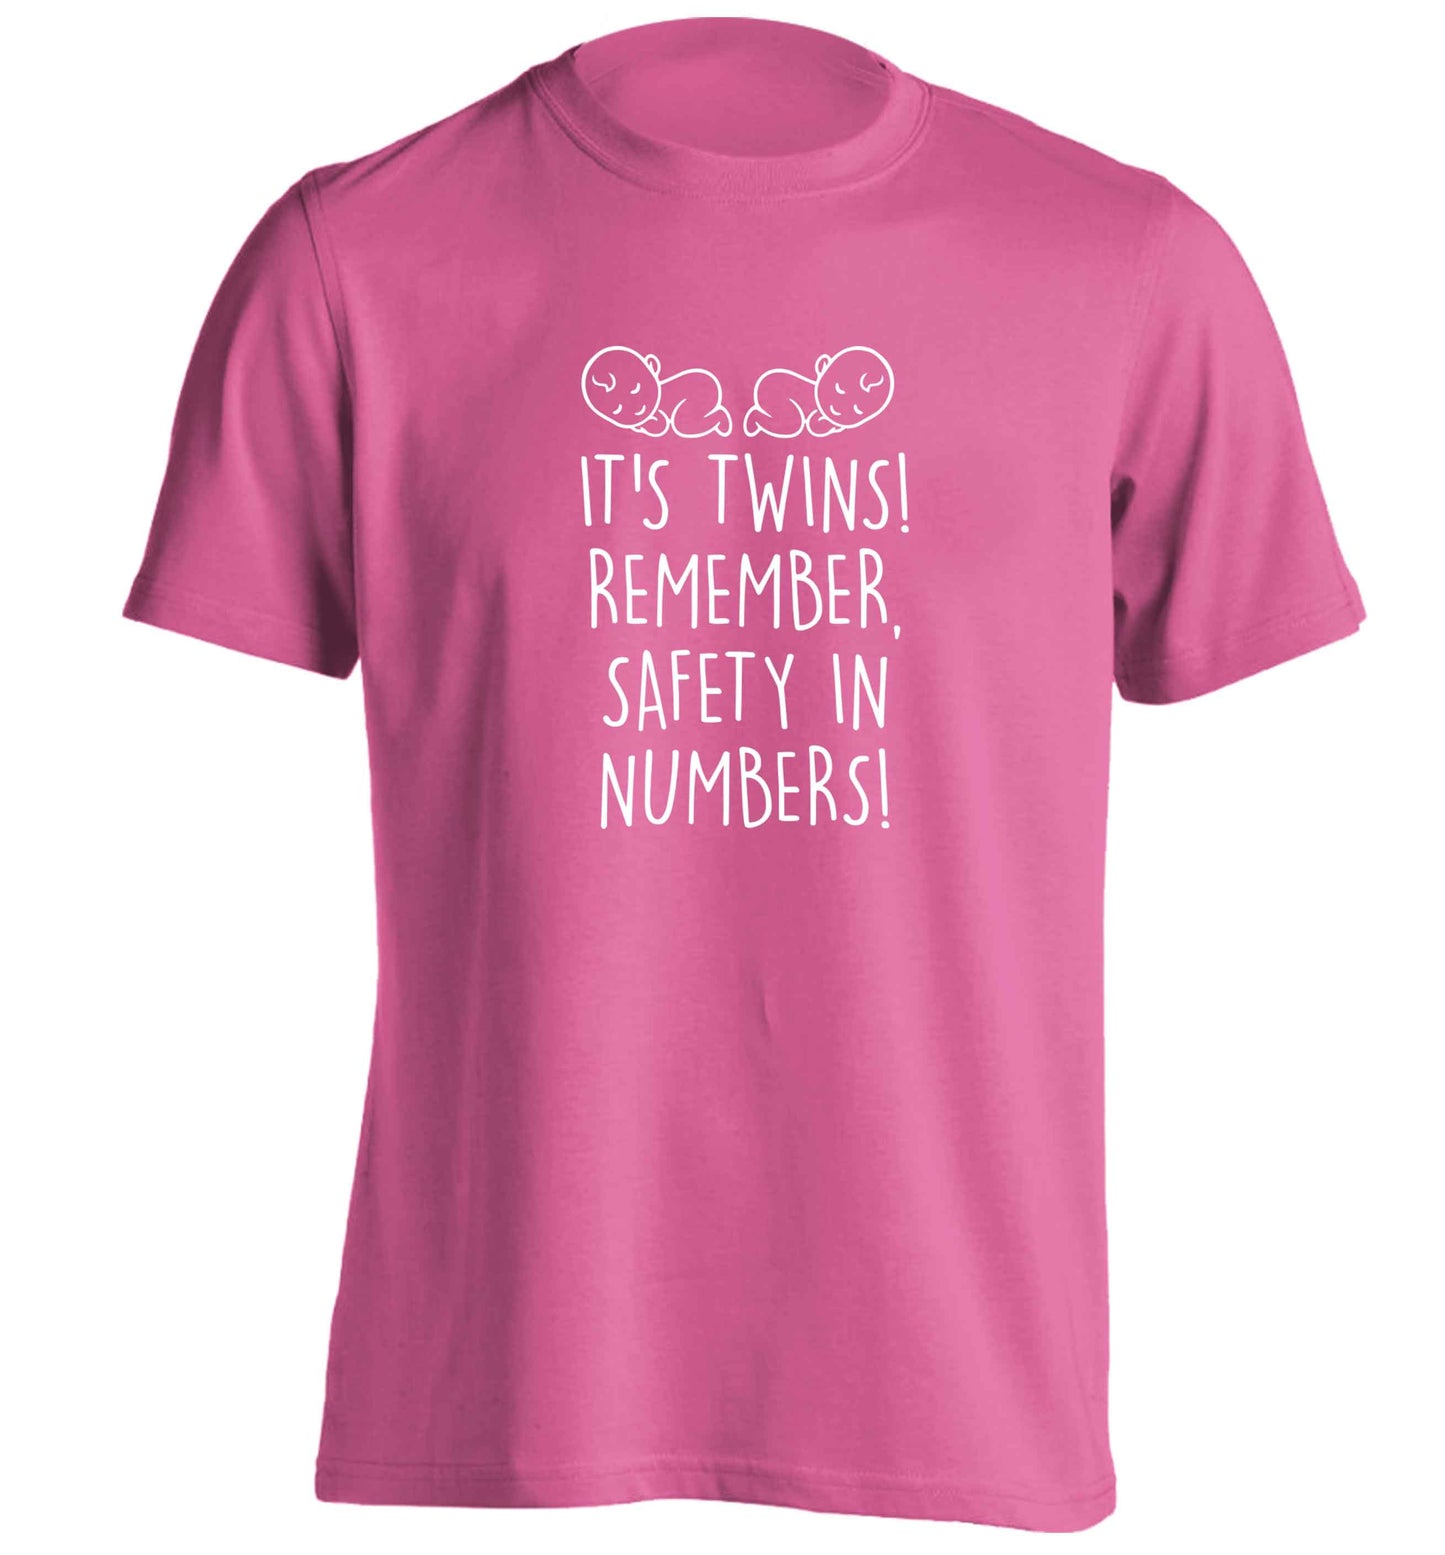 It's twins! Remember safety in numbers! adults unisex pink Tshirt 2XL